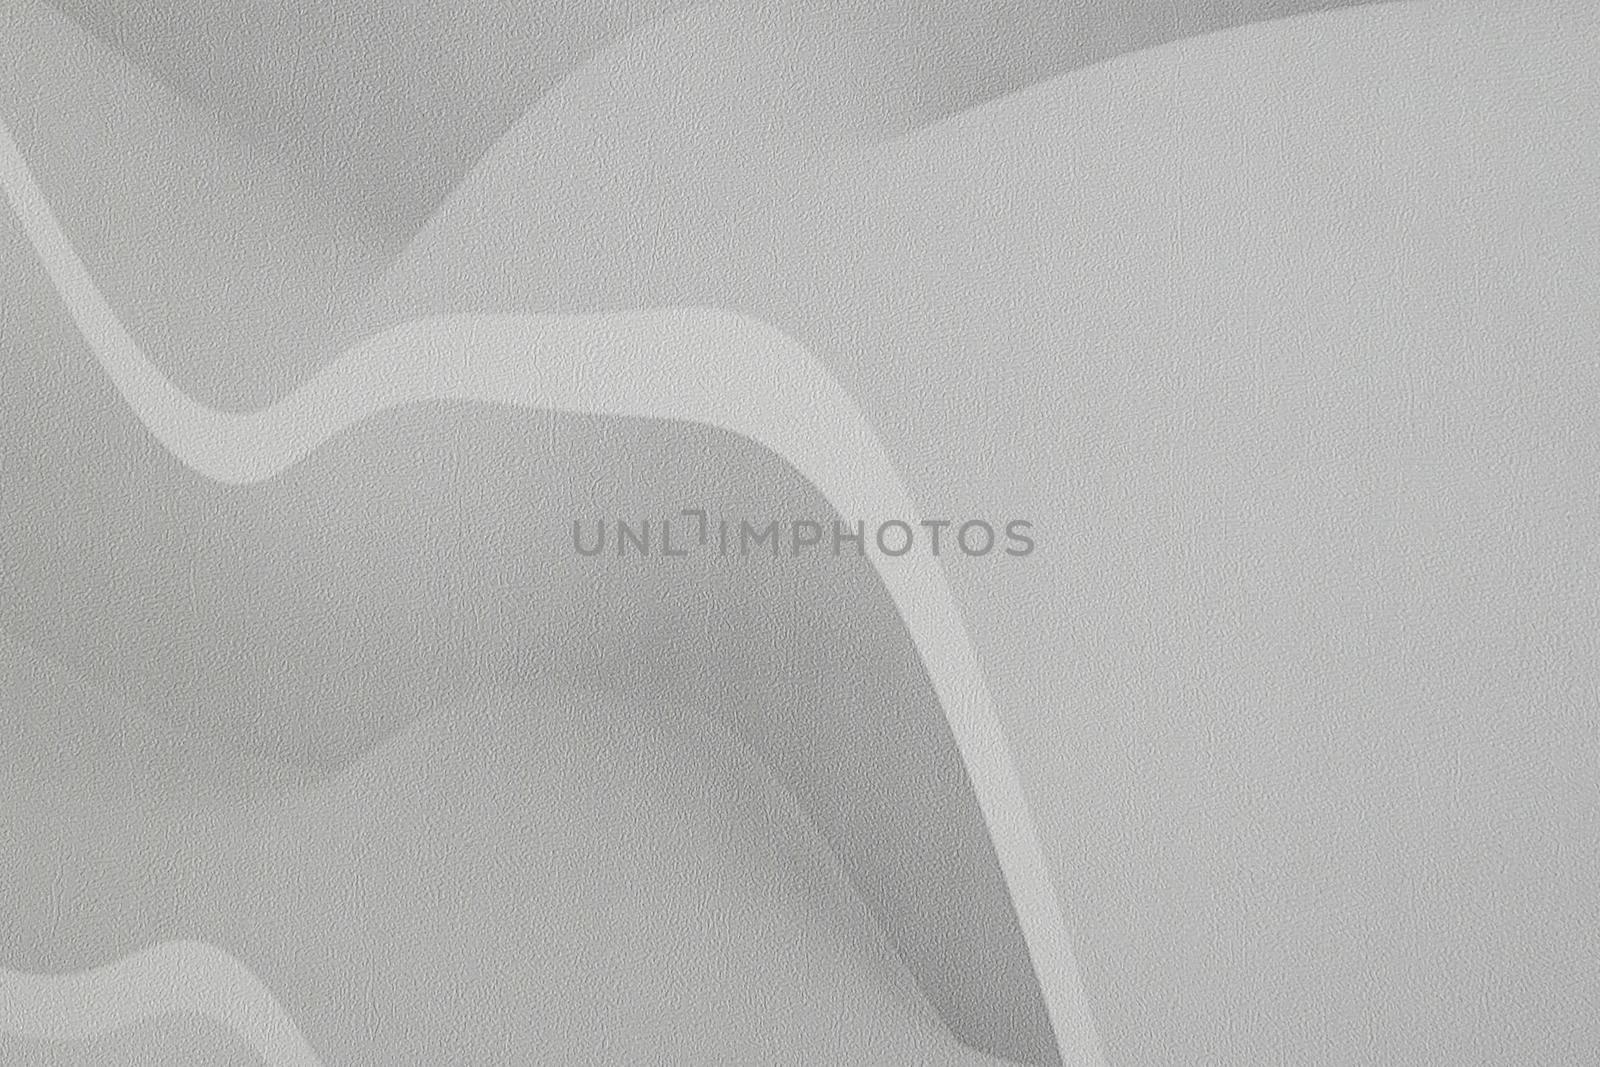 Modern wall wallpaper texture for background. Home decoration, abstraction, structure of waves or hills, gray and white.